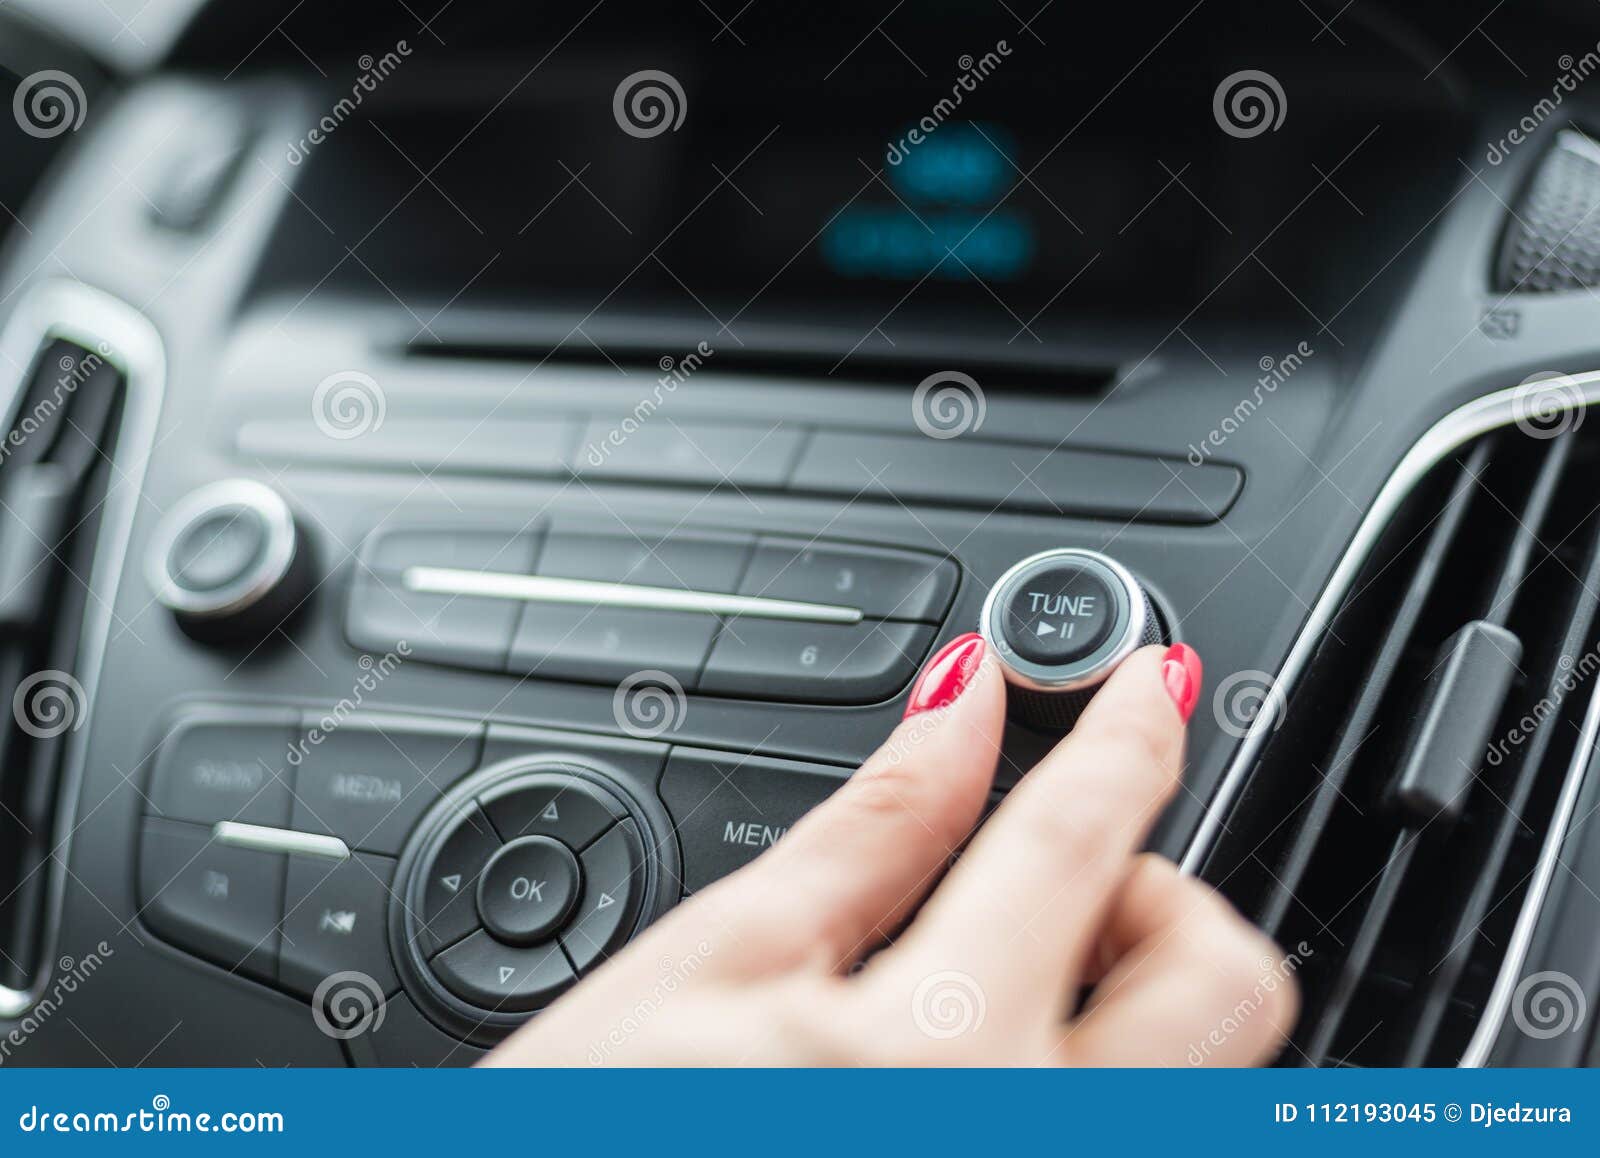 Woman Changing Frequency on Car Radio Stock Image - Image of modern,  device: 112193045